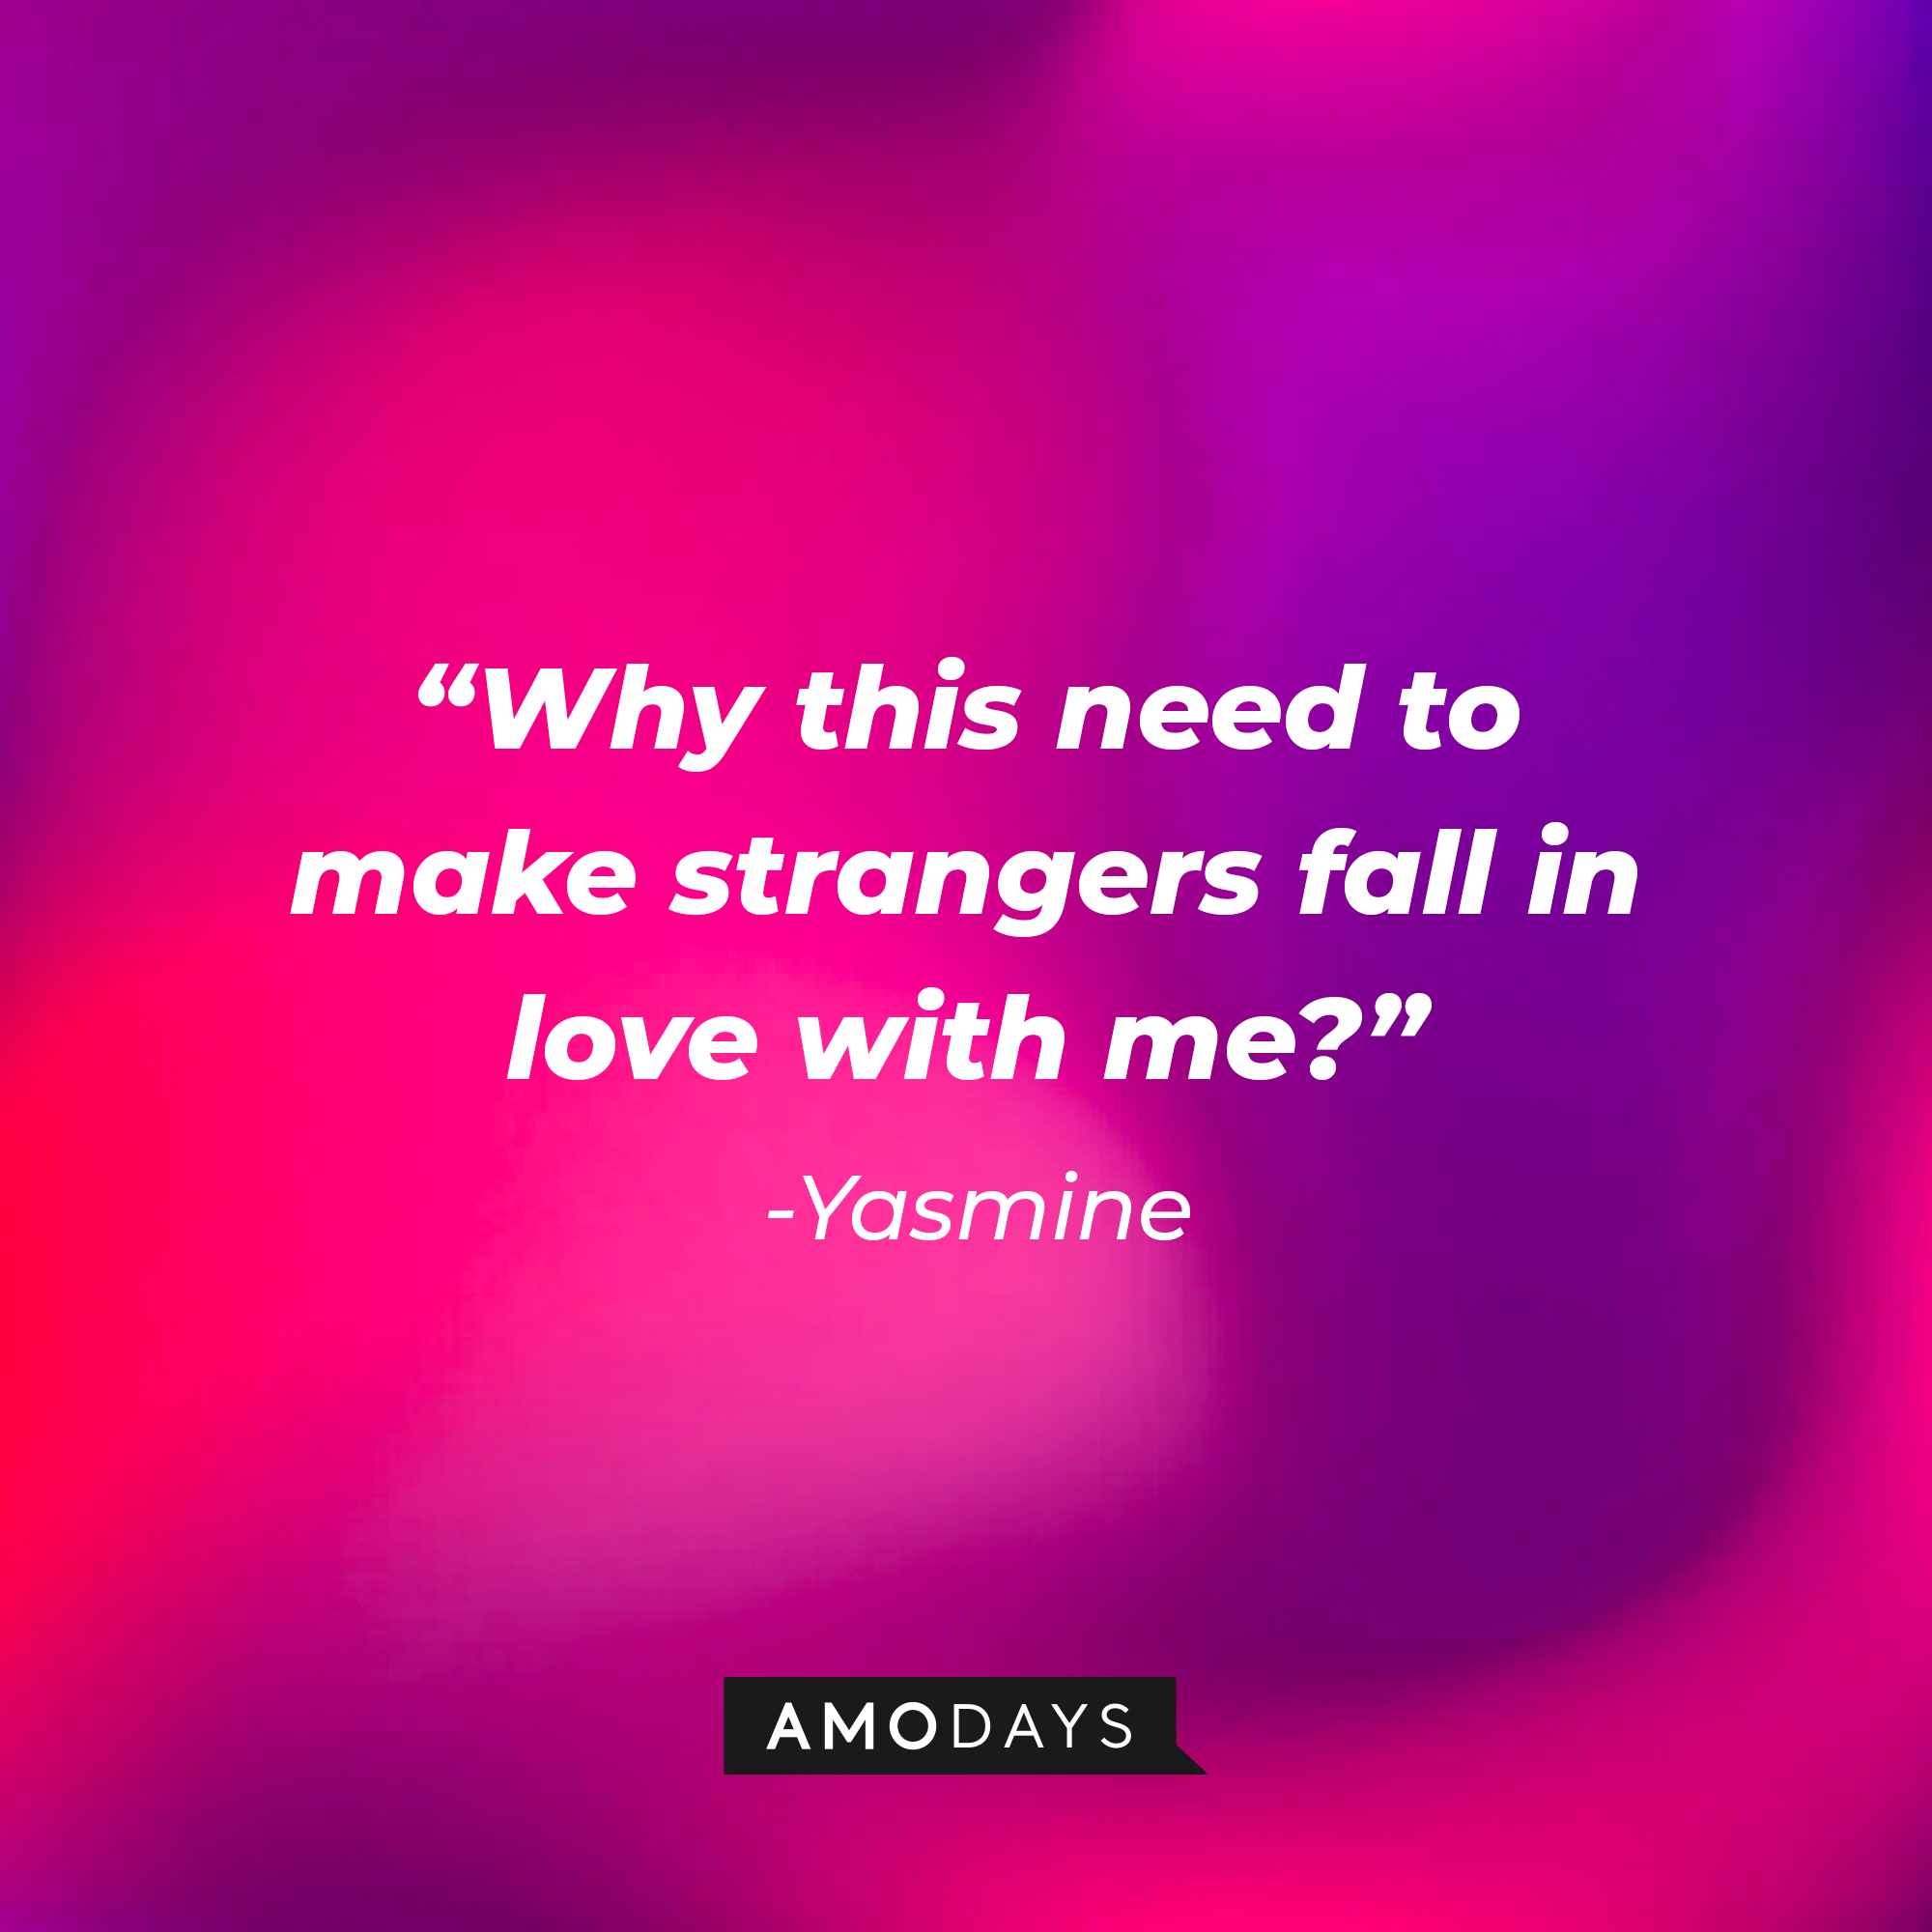 Yasmine’s quote from “Modern Love”: “Why this need to make strangers fall in love with me?”  | Source: AmoDays